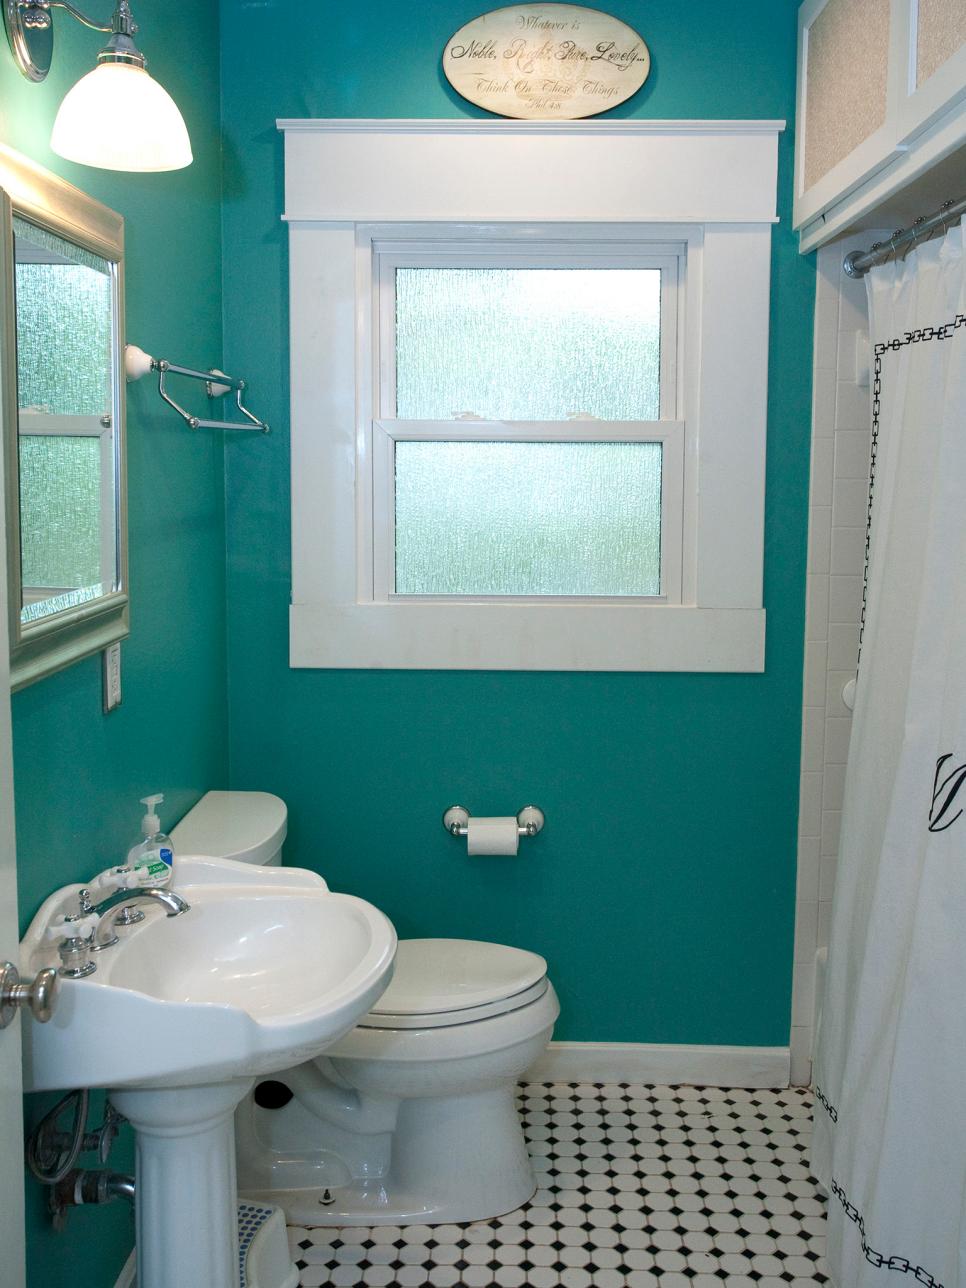 How to make a small bathroom look bigger in 7 tips